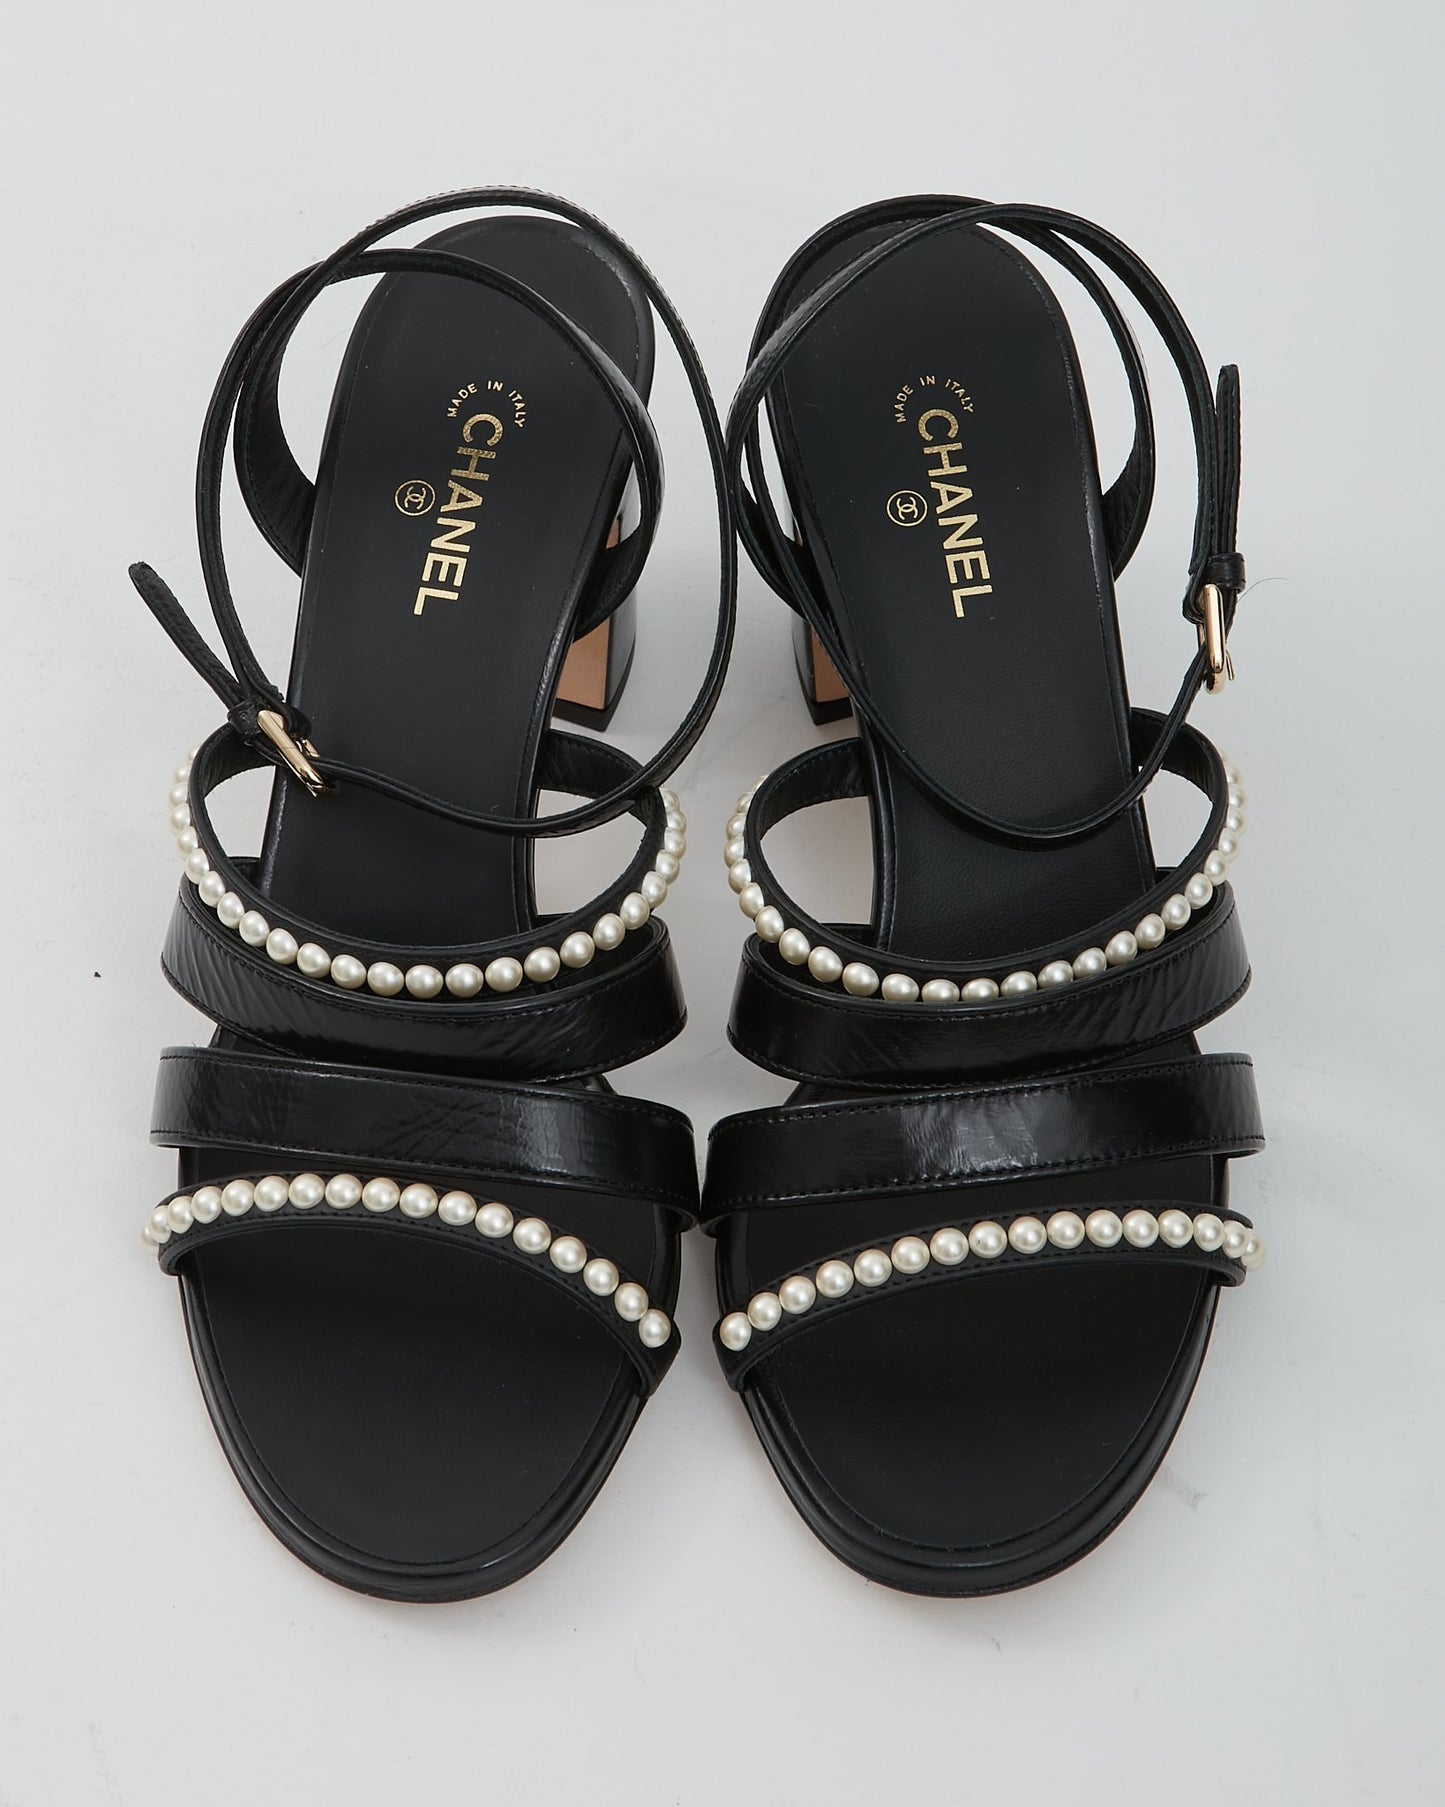 Chanel Black Leather With Pearls Strap Sandal Heel - 39.5